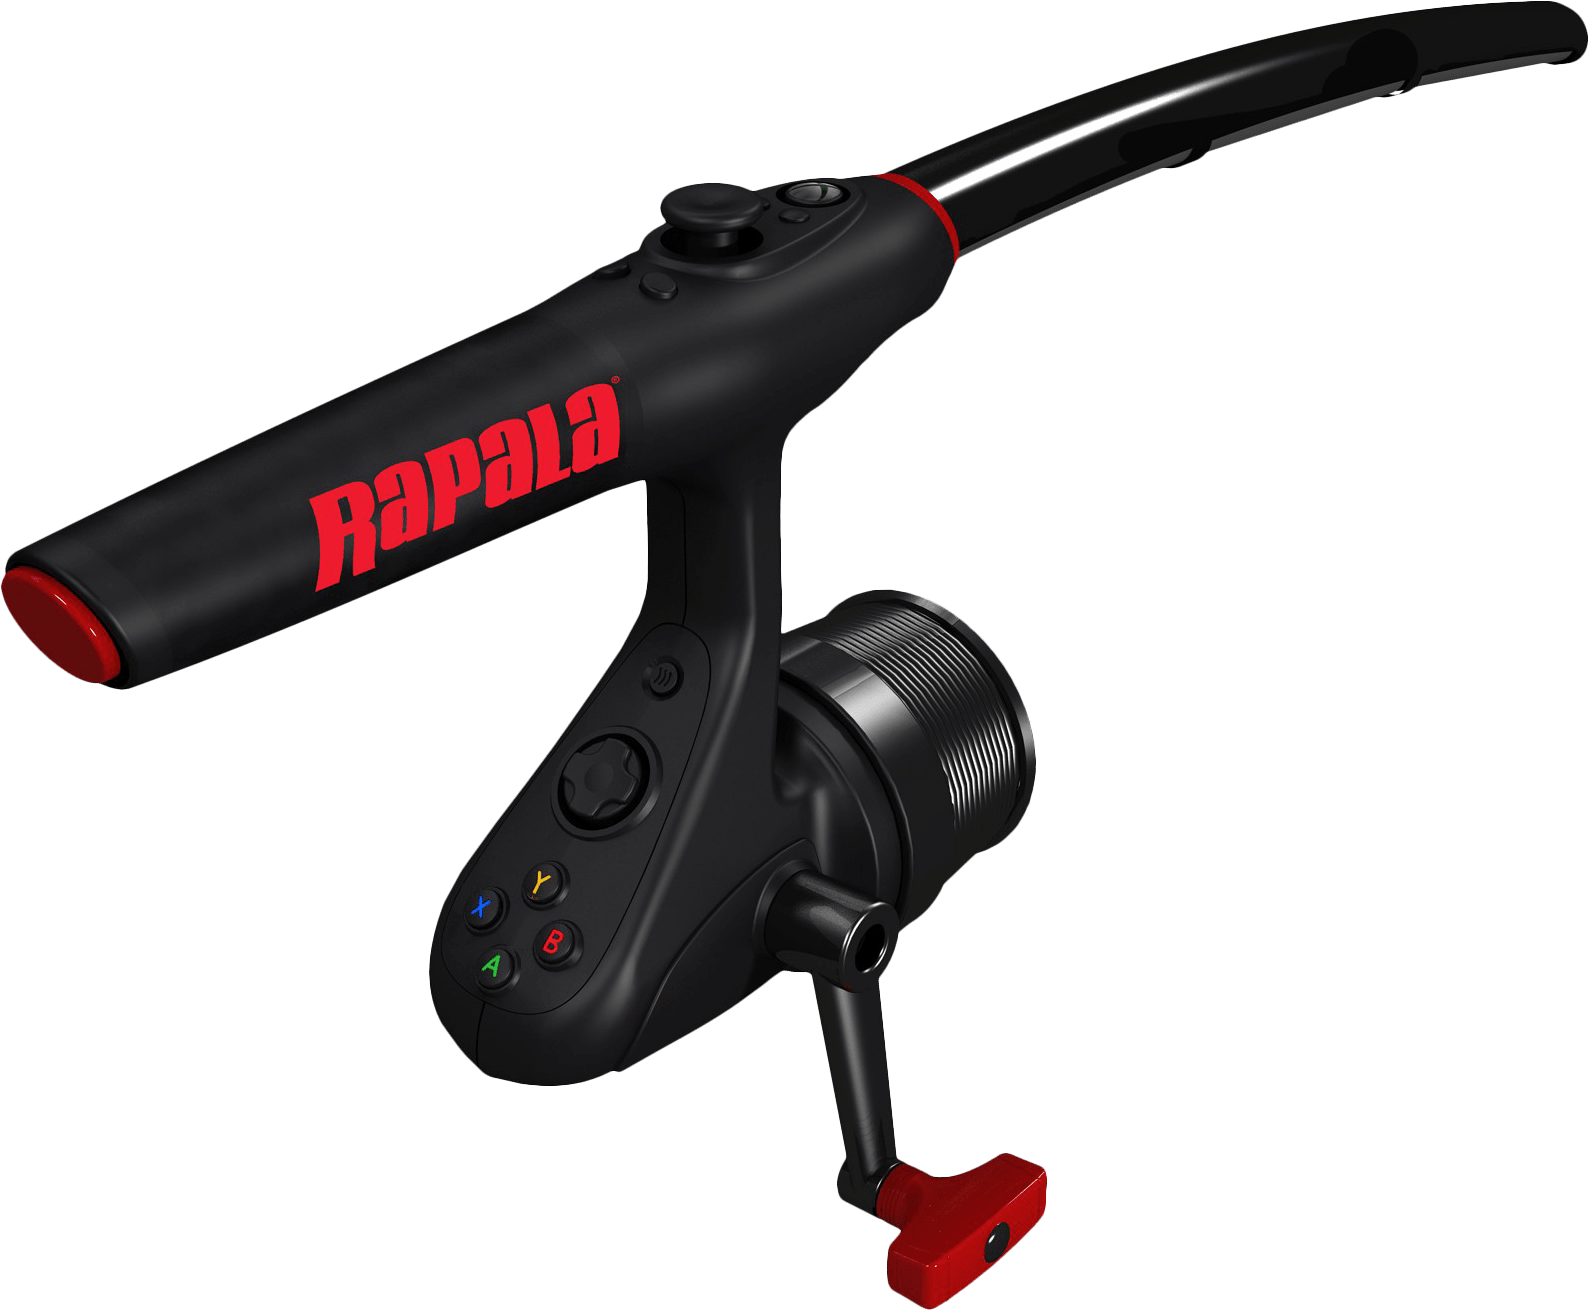 Rapala Pro Bass Fishing - Wireless Rod Controller (Game Not Included)(Xbox  360)(Pwned)(PS3)(Pwned), Buy from Pwned Games with confidence.